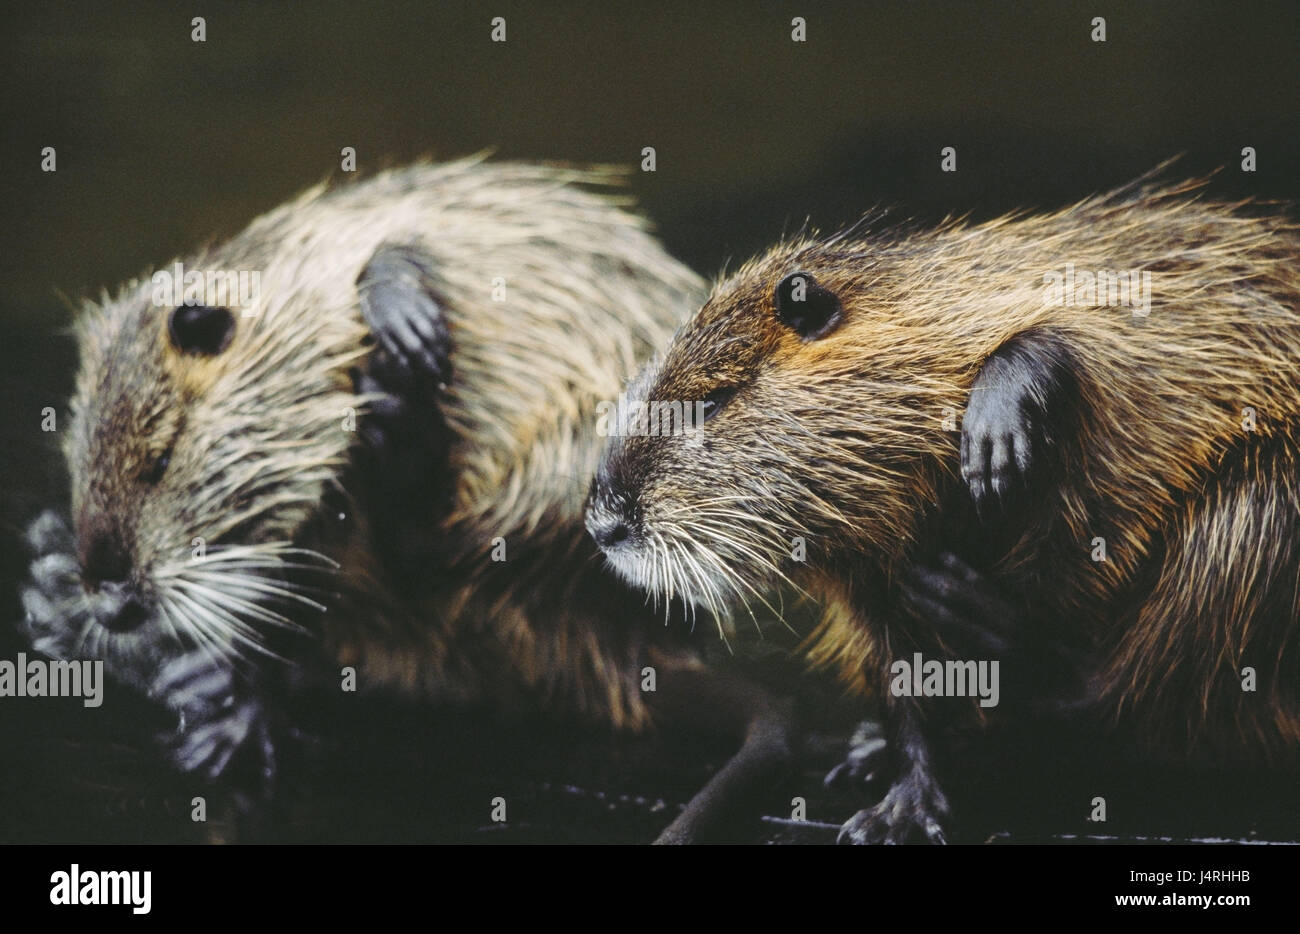 Nutria, beavers, Myocastor coypus, at the side, marsh beavers, tail beavers, tail rat, Coypu, water rat, adult, full-grown, nature, Wildlife, animals, wild animal, mammal, mammal, Mammalia, rodent, Rodentia, beaver, Neozoon, clean, scratch, clean, watchfully, river, sweetly, drolly, tourist attraction, Auswilderung, diurnal, behaviour, prey, fur animal, Peltier's breeding, water, brook, unkemptly, shaggy, itches, fur care, care, Germany, Thuringia, hall field, to hall, Stock Photo